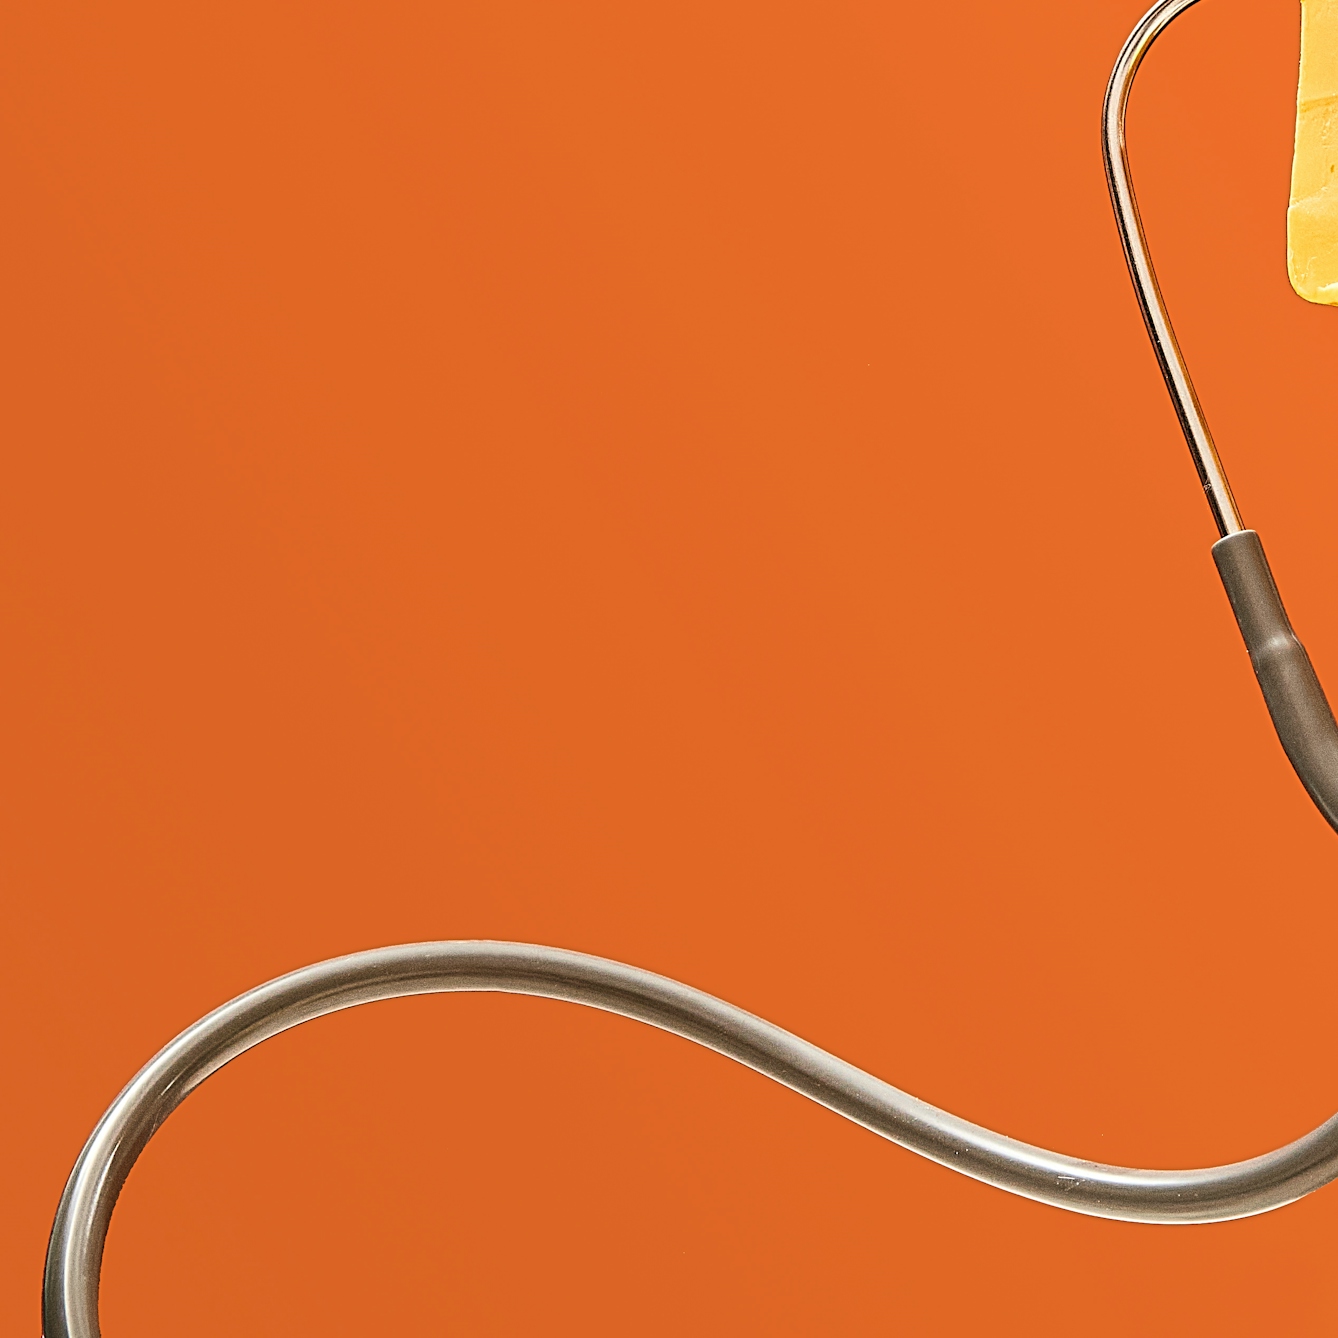 Photograph of a stethoscope floating in front of a bright orange background, the tubing curling in a snake-like shape. The chest-piece is just out of frame. Just visible in the top right corner is the edge of a rectangular block of unwrapped yellow cheddar cheese. 